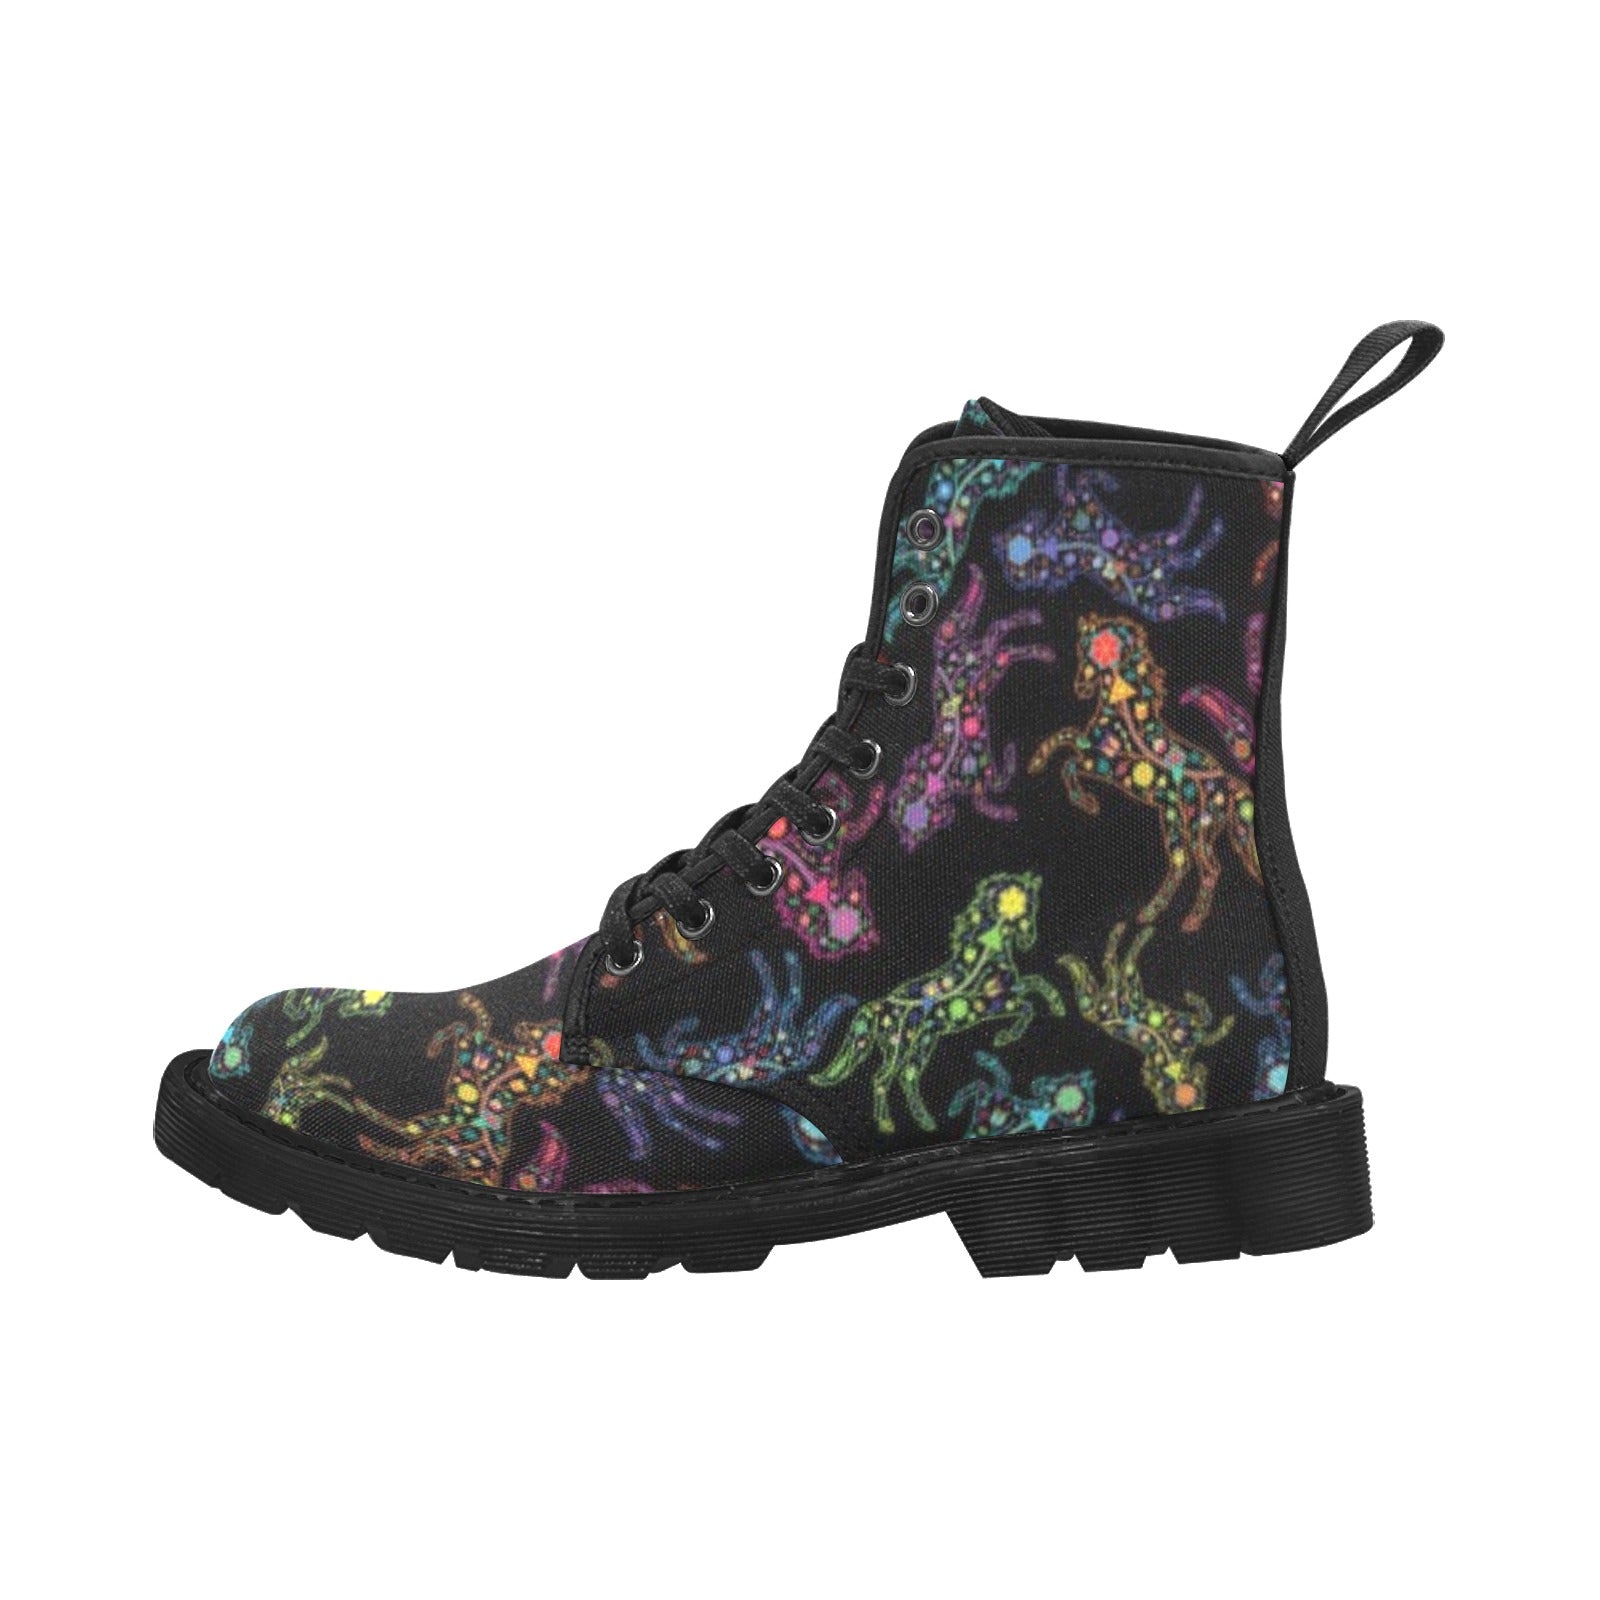 Neon Floral Horses Boots for Women (Black)